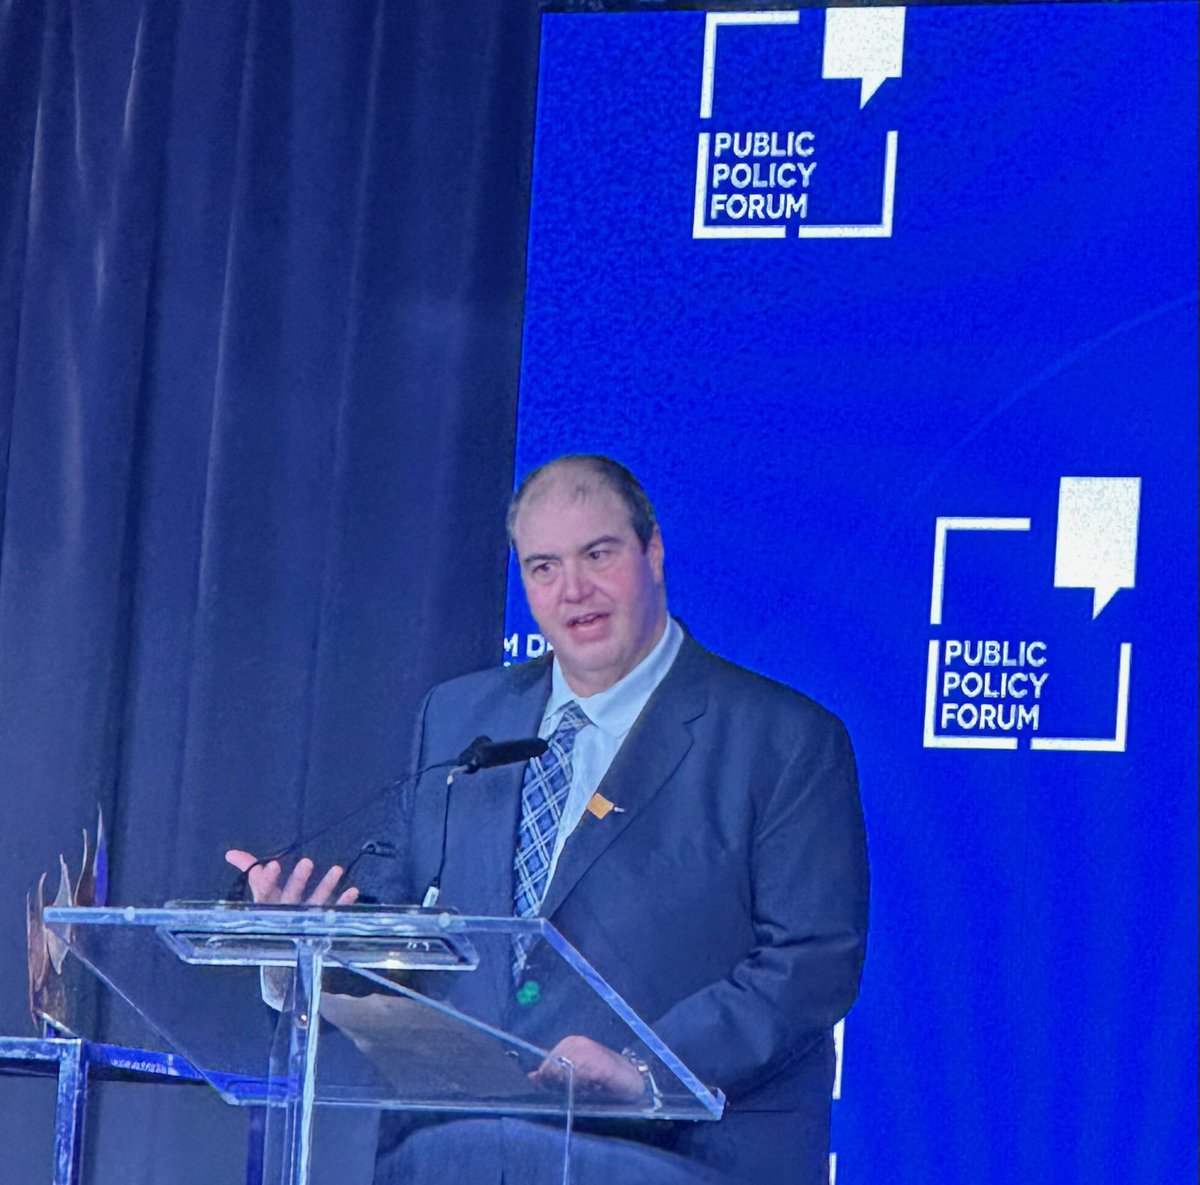 'The world needs a little more Canada.' Especially when it comes to food, fuel and fertilizer. Murad Al-Katib at the @ppforumca annual awards to urge 🇨🇦 to pursue the 'new agriculture' — climate smart farming to feed the world. 'Be dinner or be the diner!'